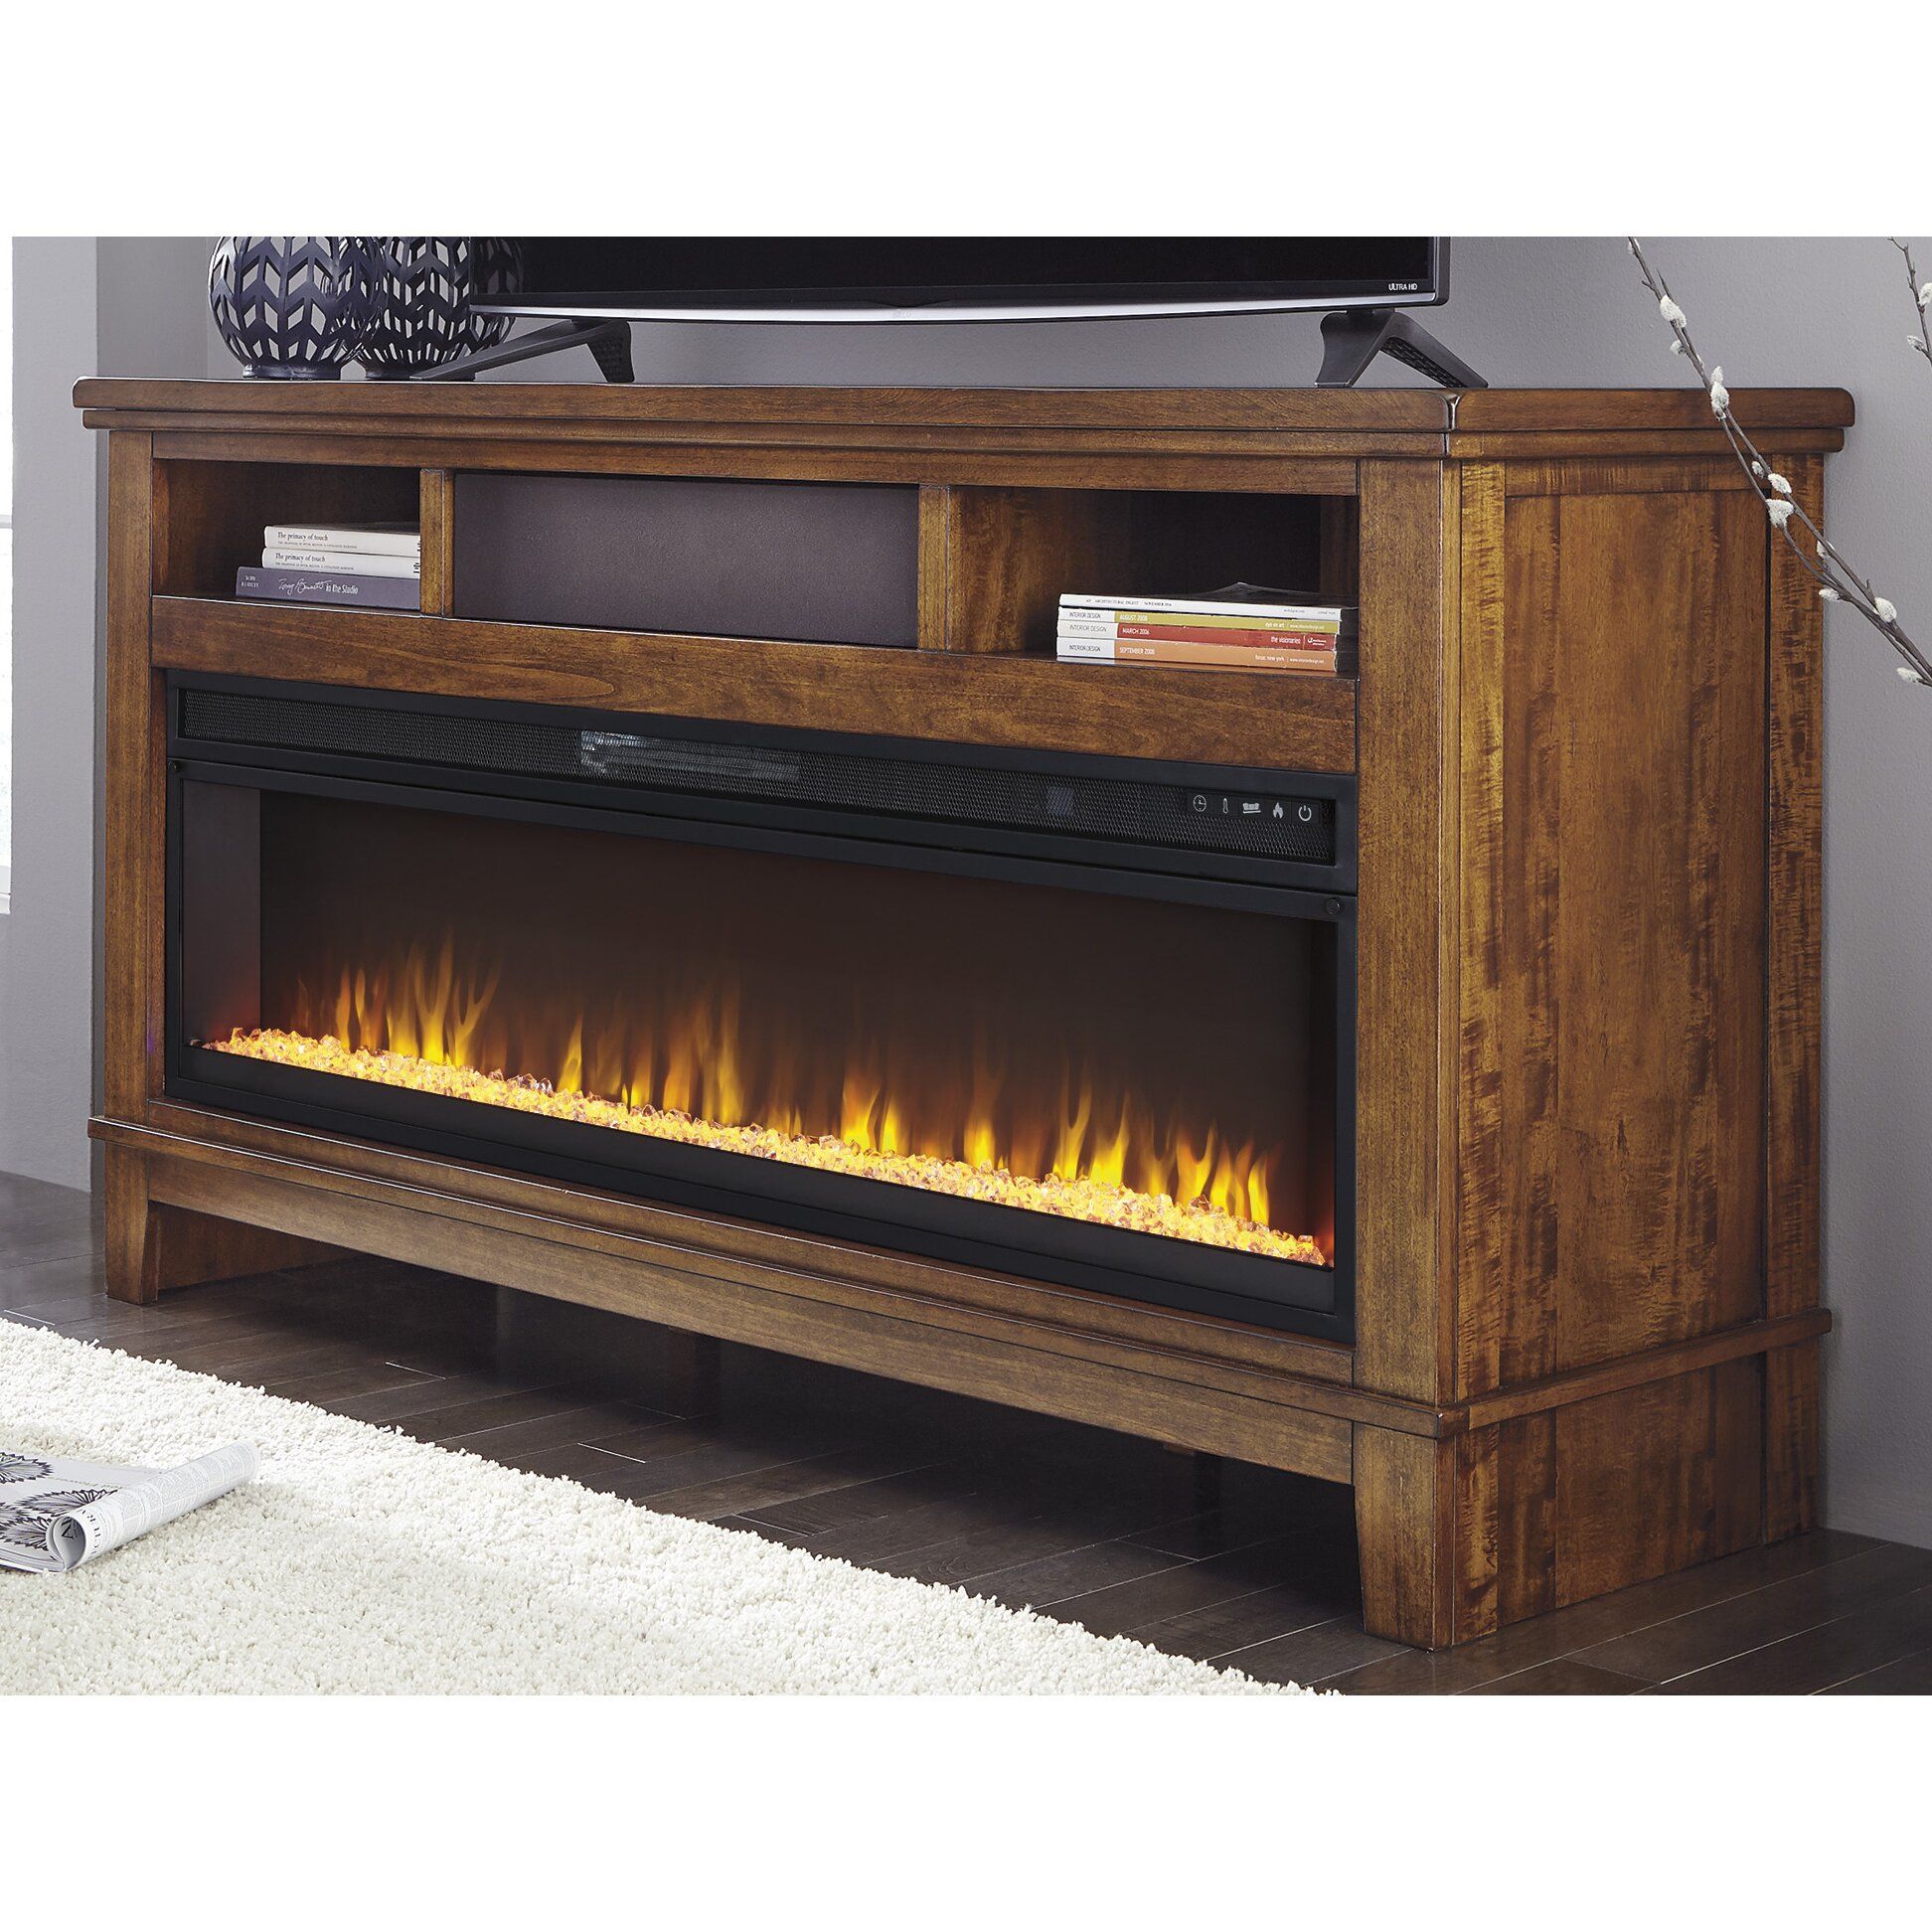 Brayden Studio Hylan Tv Stand With Electric Fireplace & Reviews | Wayfair Intended For Tv Stands With Electric Fireplace (Gallery 18 of 20)